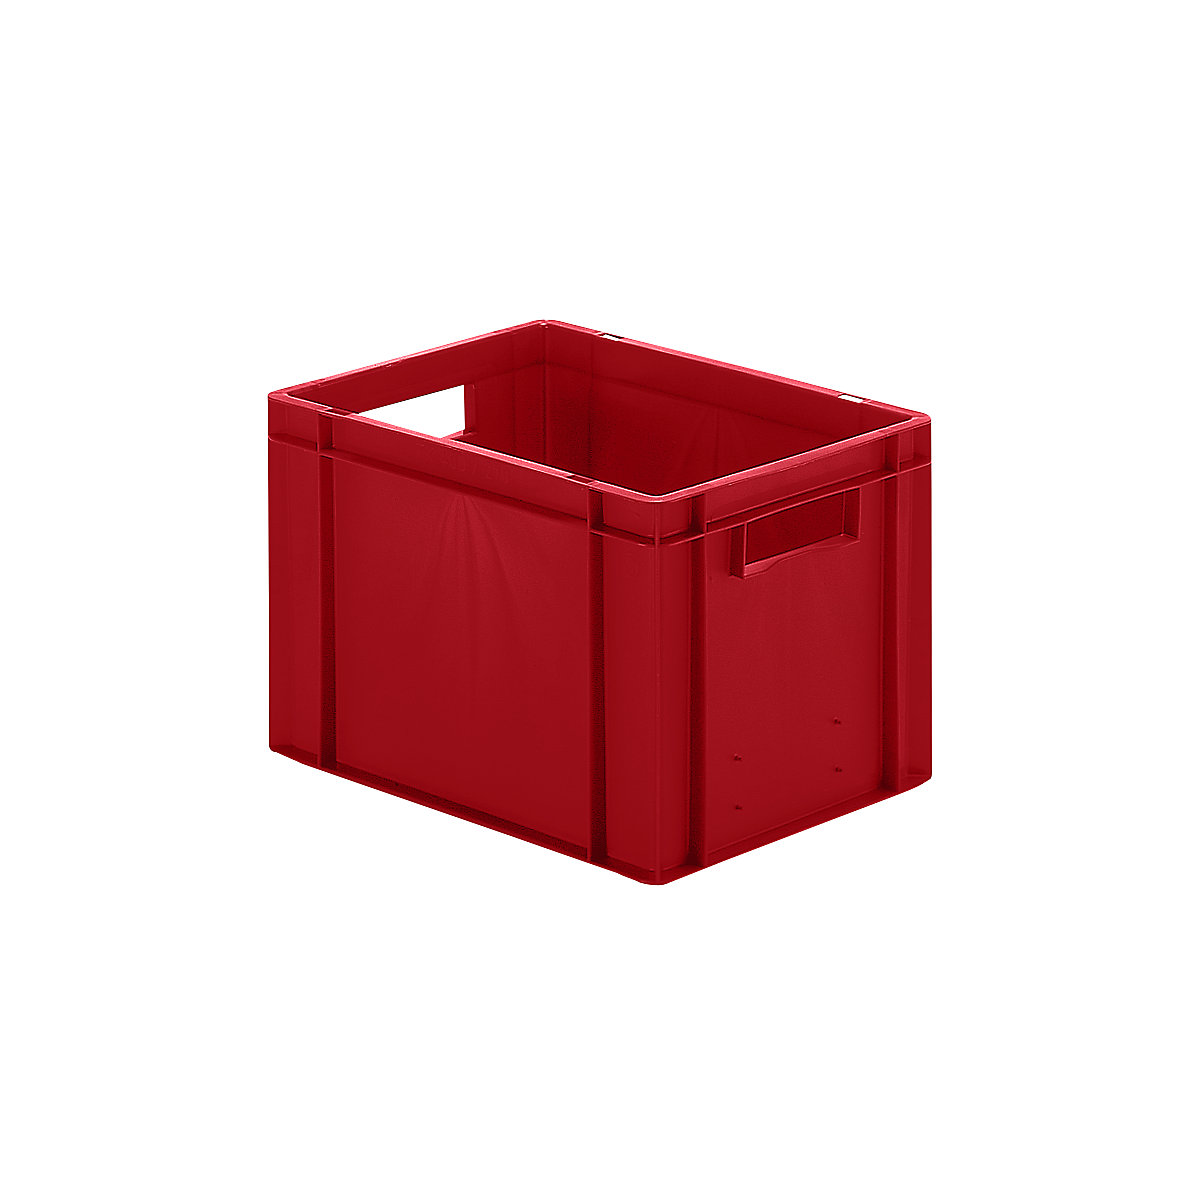 Euro stacking container, closed walls and base, LxWxH 400 x 300 x 270 mm, red, pack of 5